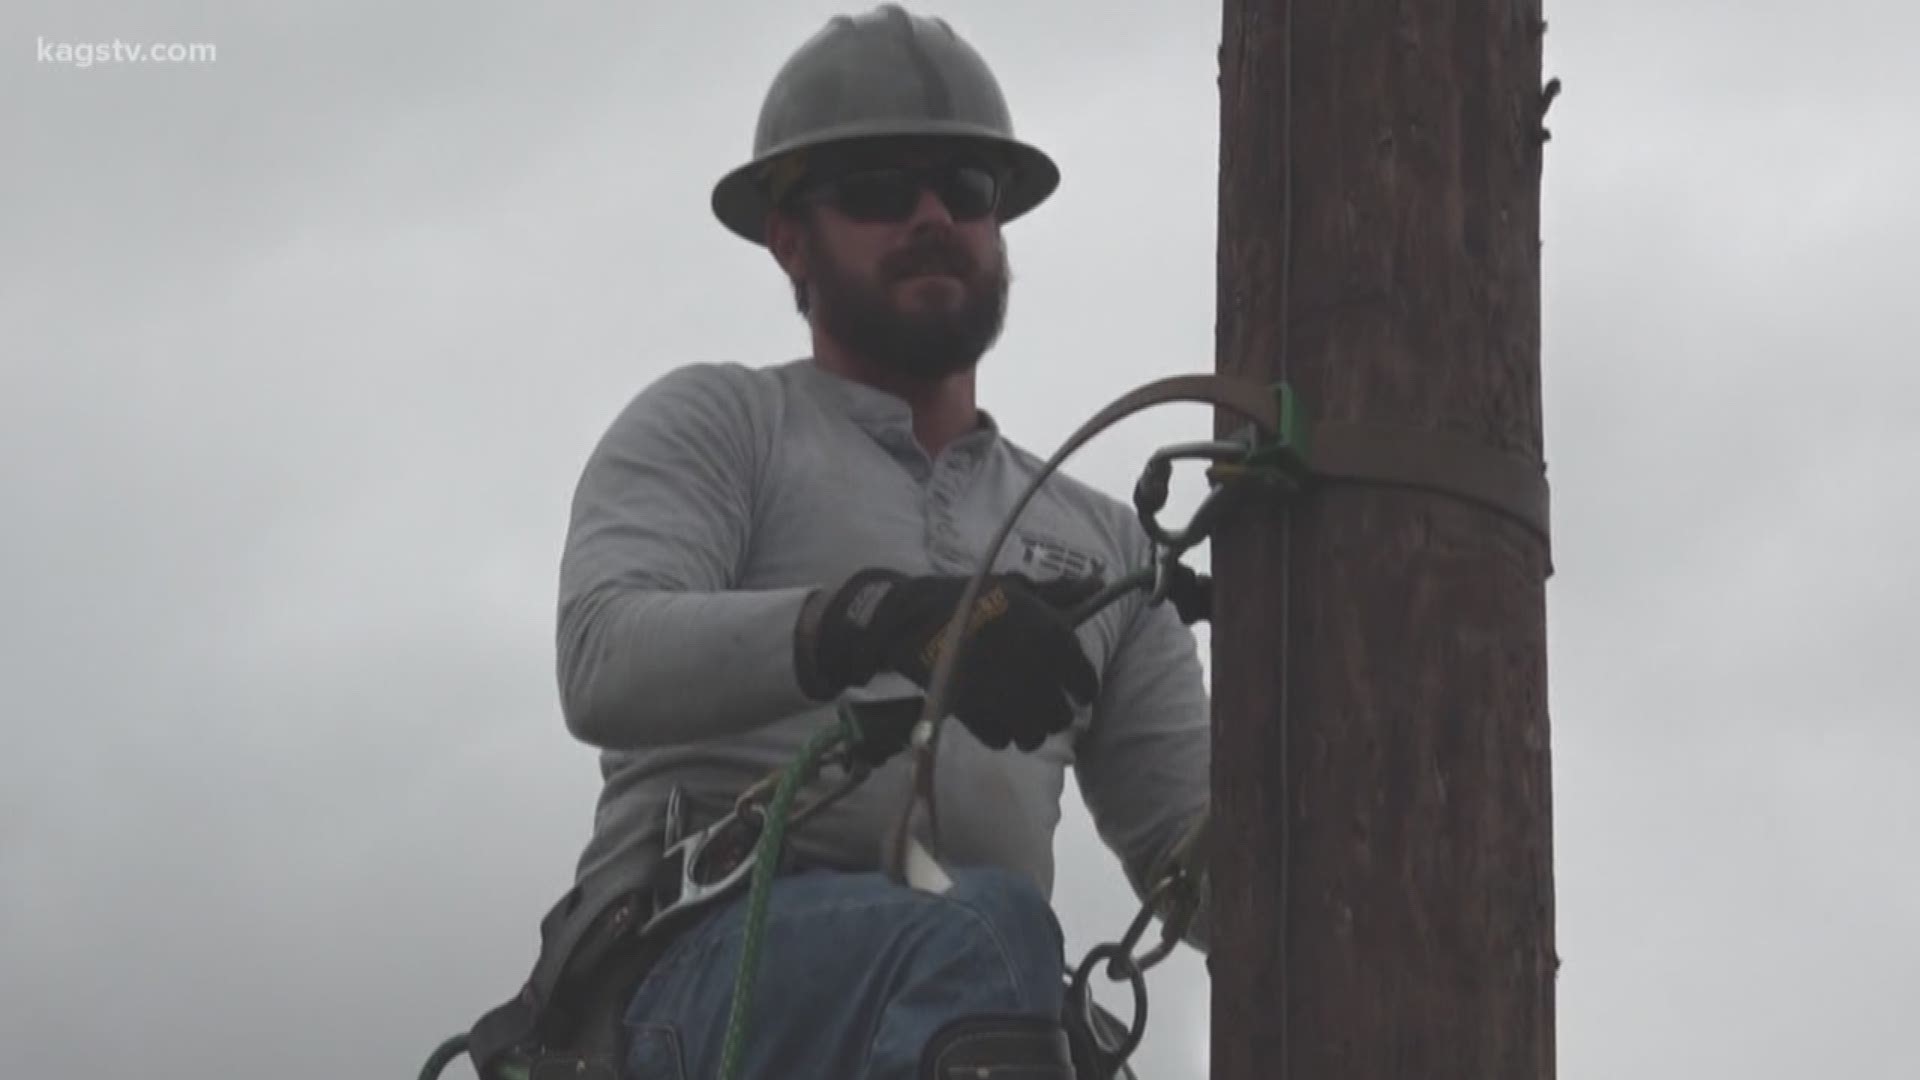 Soaring to new heights at the TEEX Lineman Academy